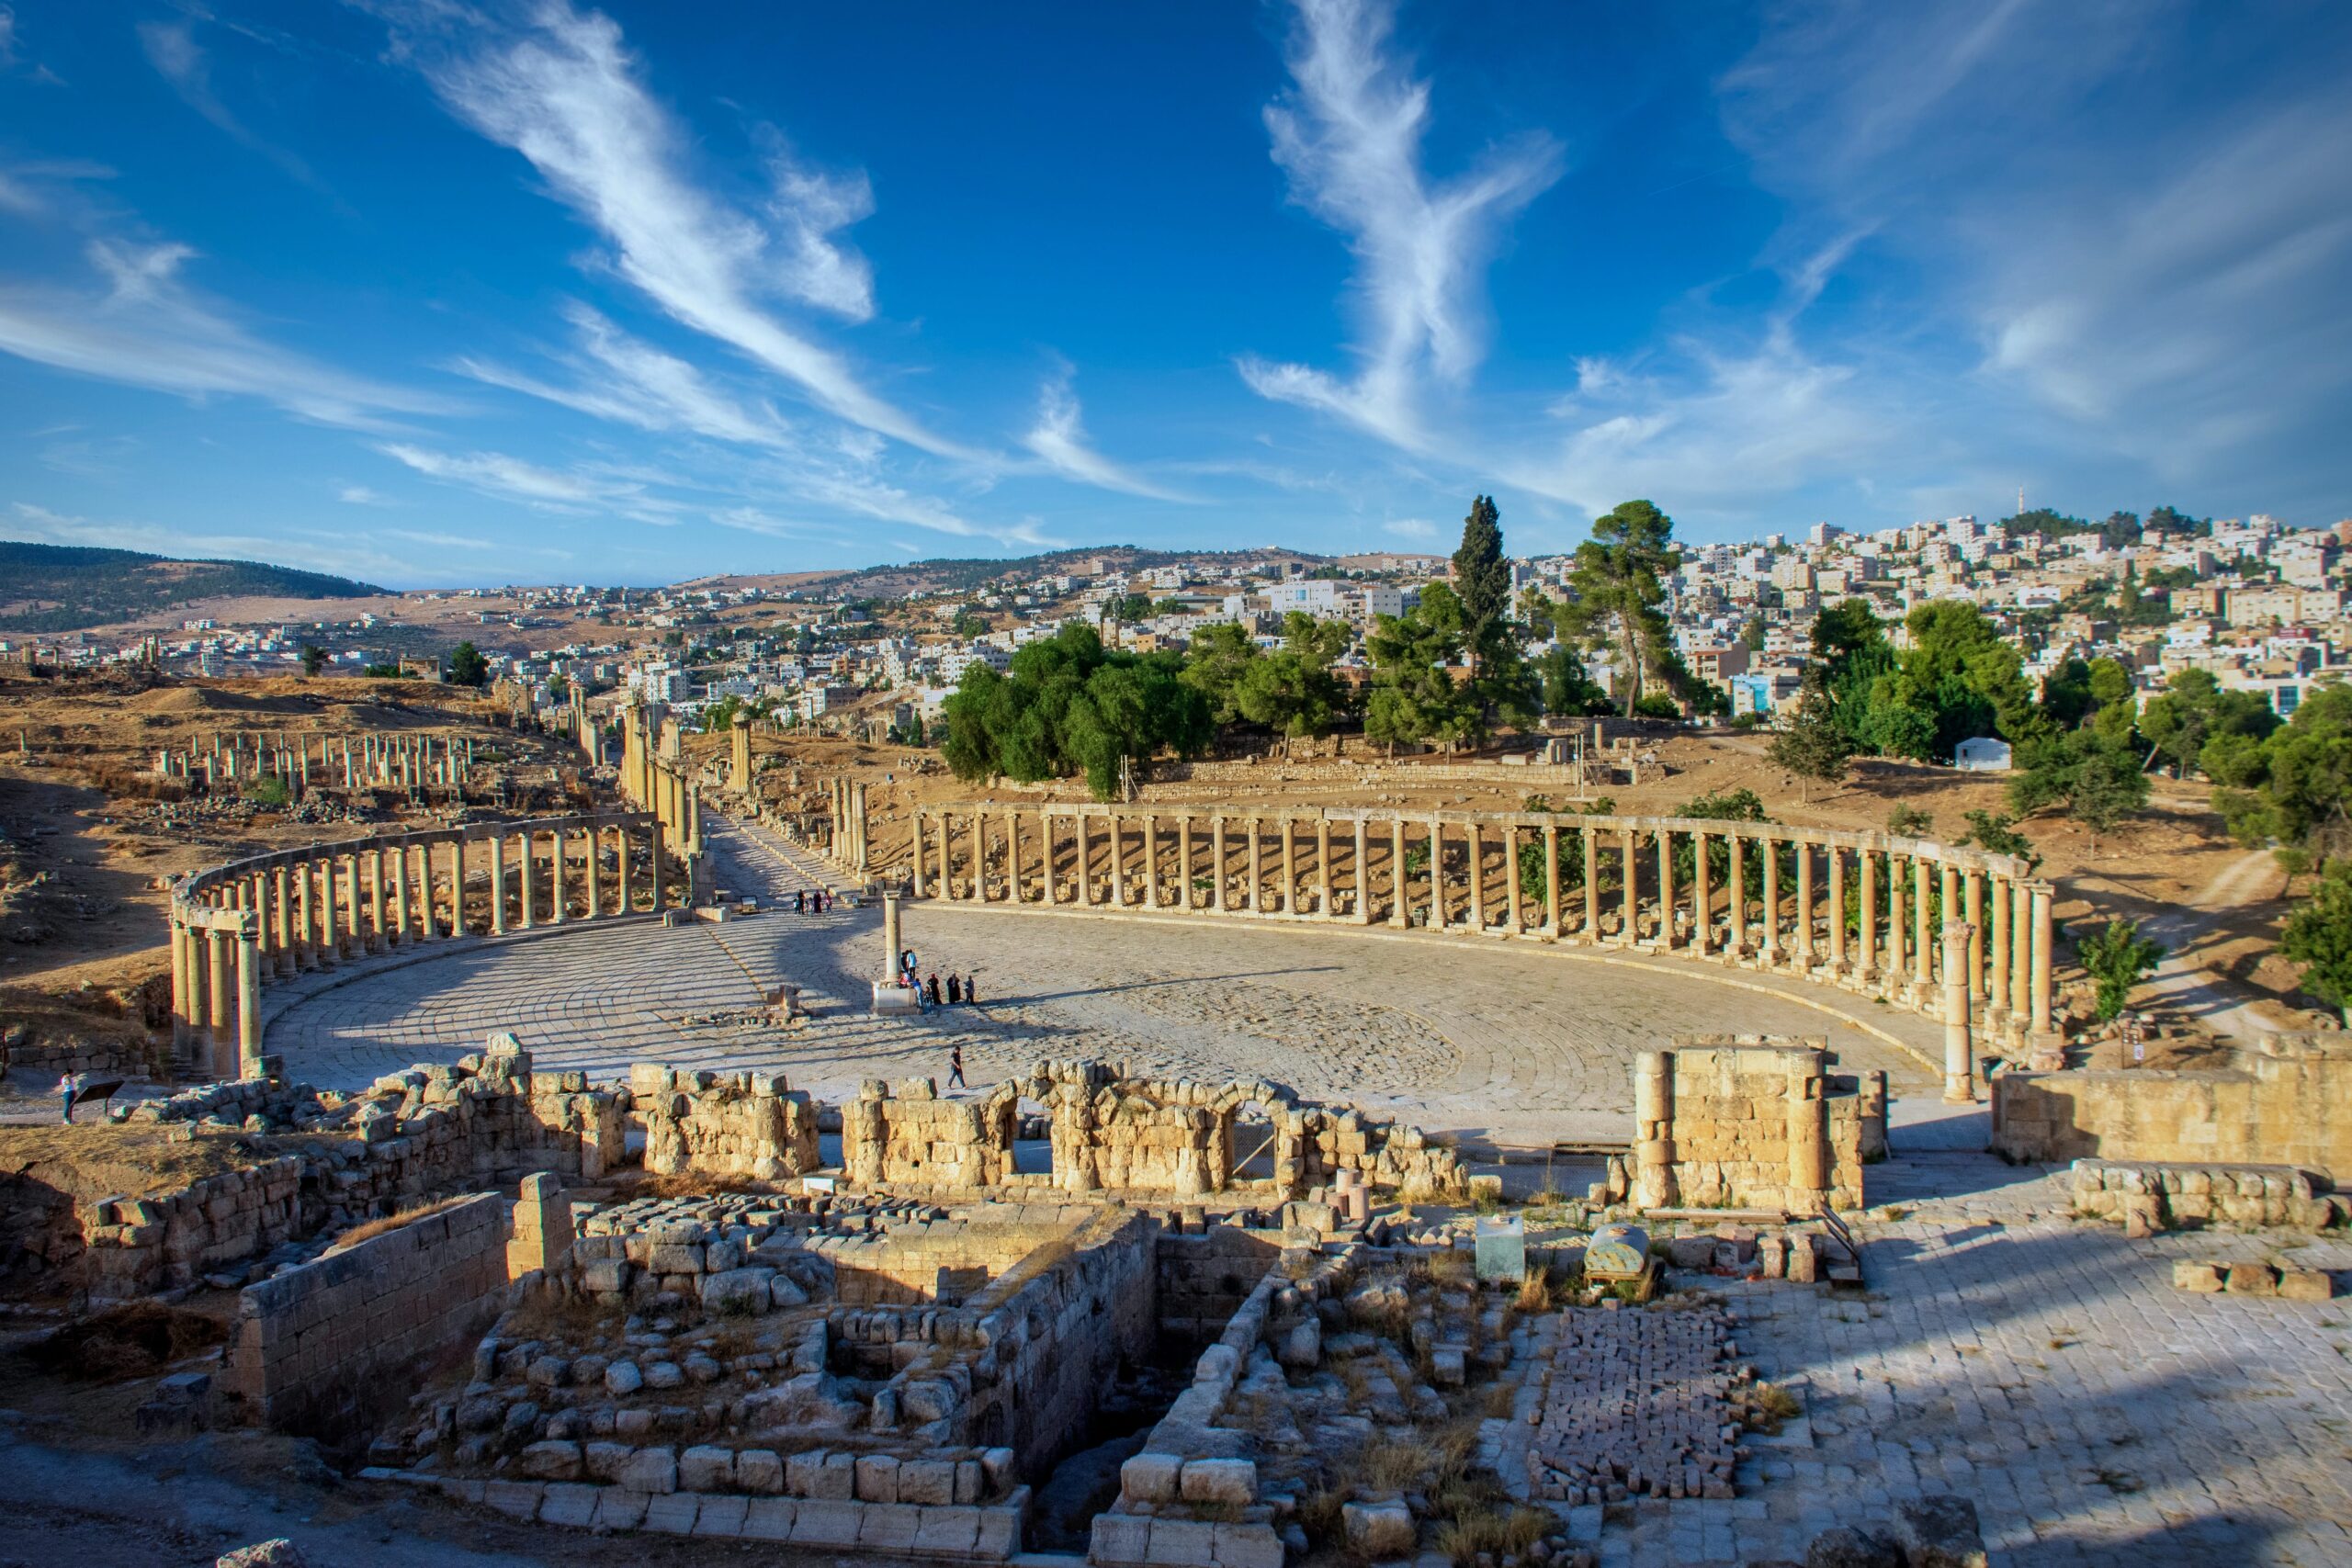 The ruins in Jerash are one of those legacies